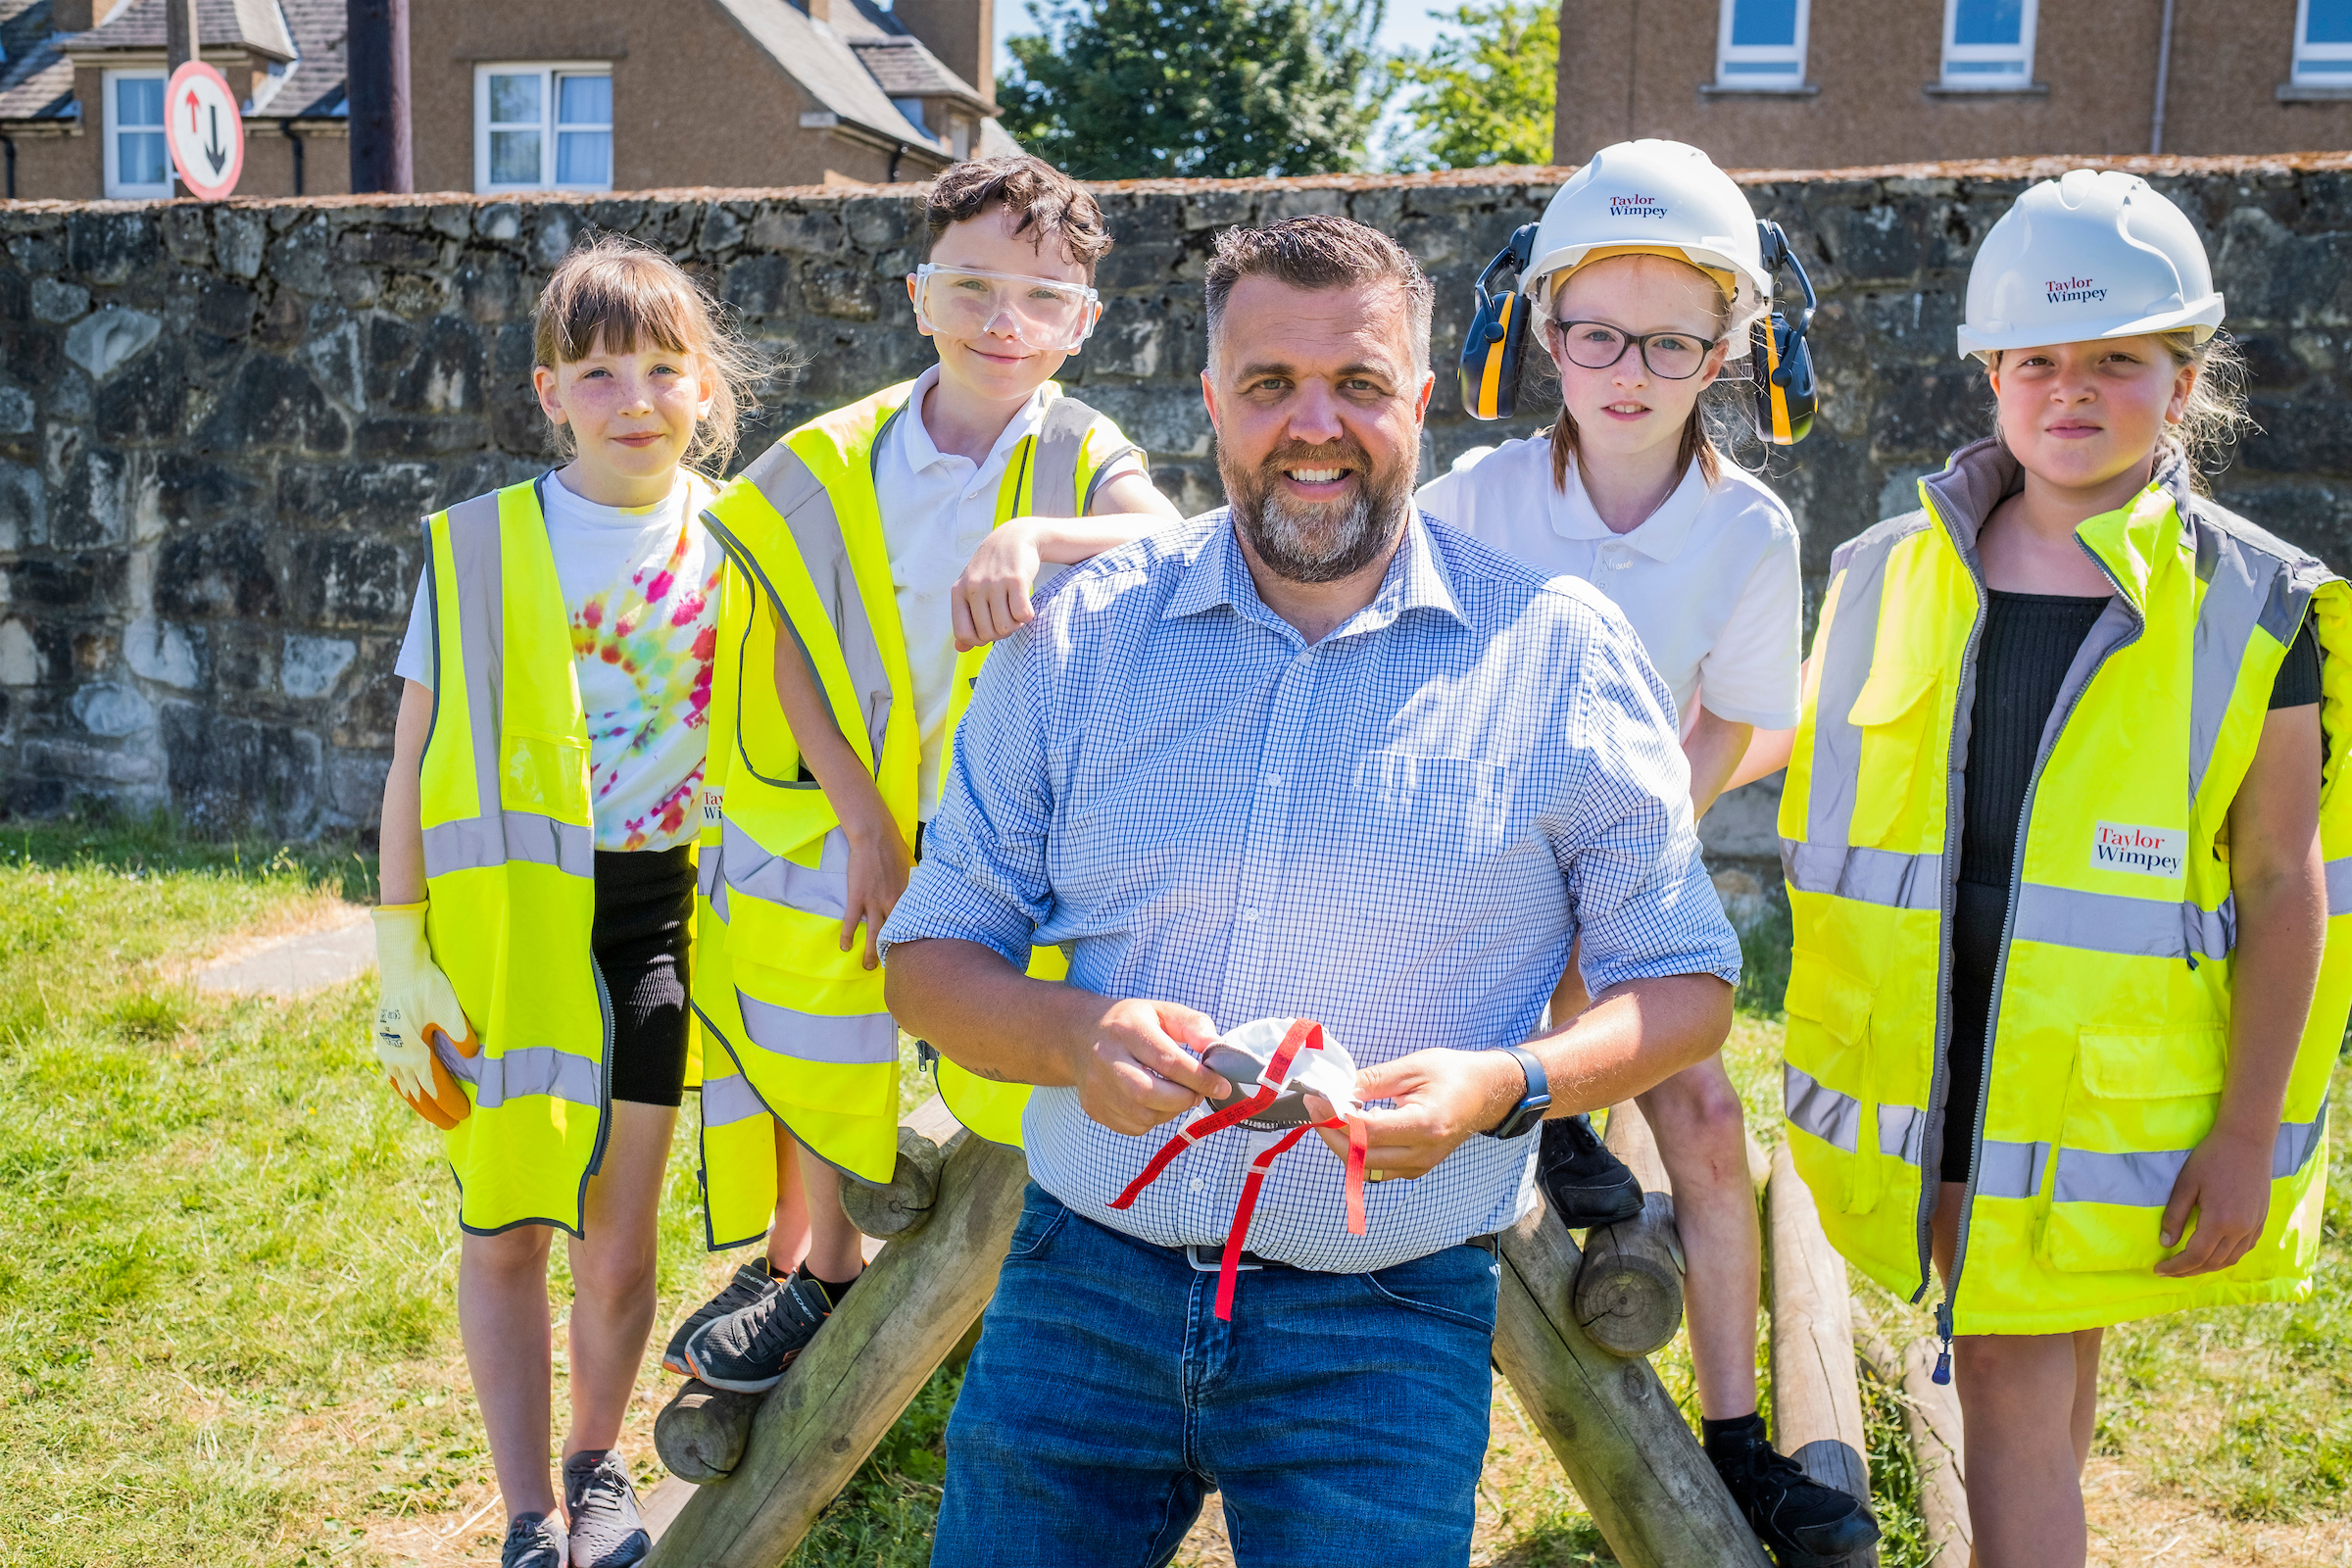 Taylor Wimpey gives lesson in safety to local school children in Edinburgh